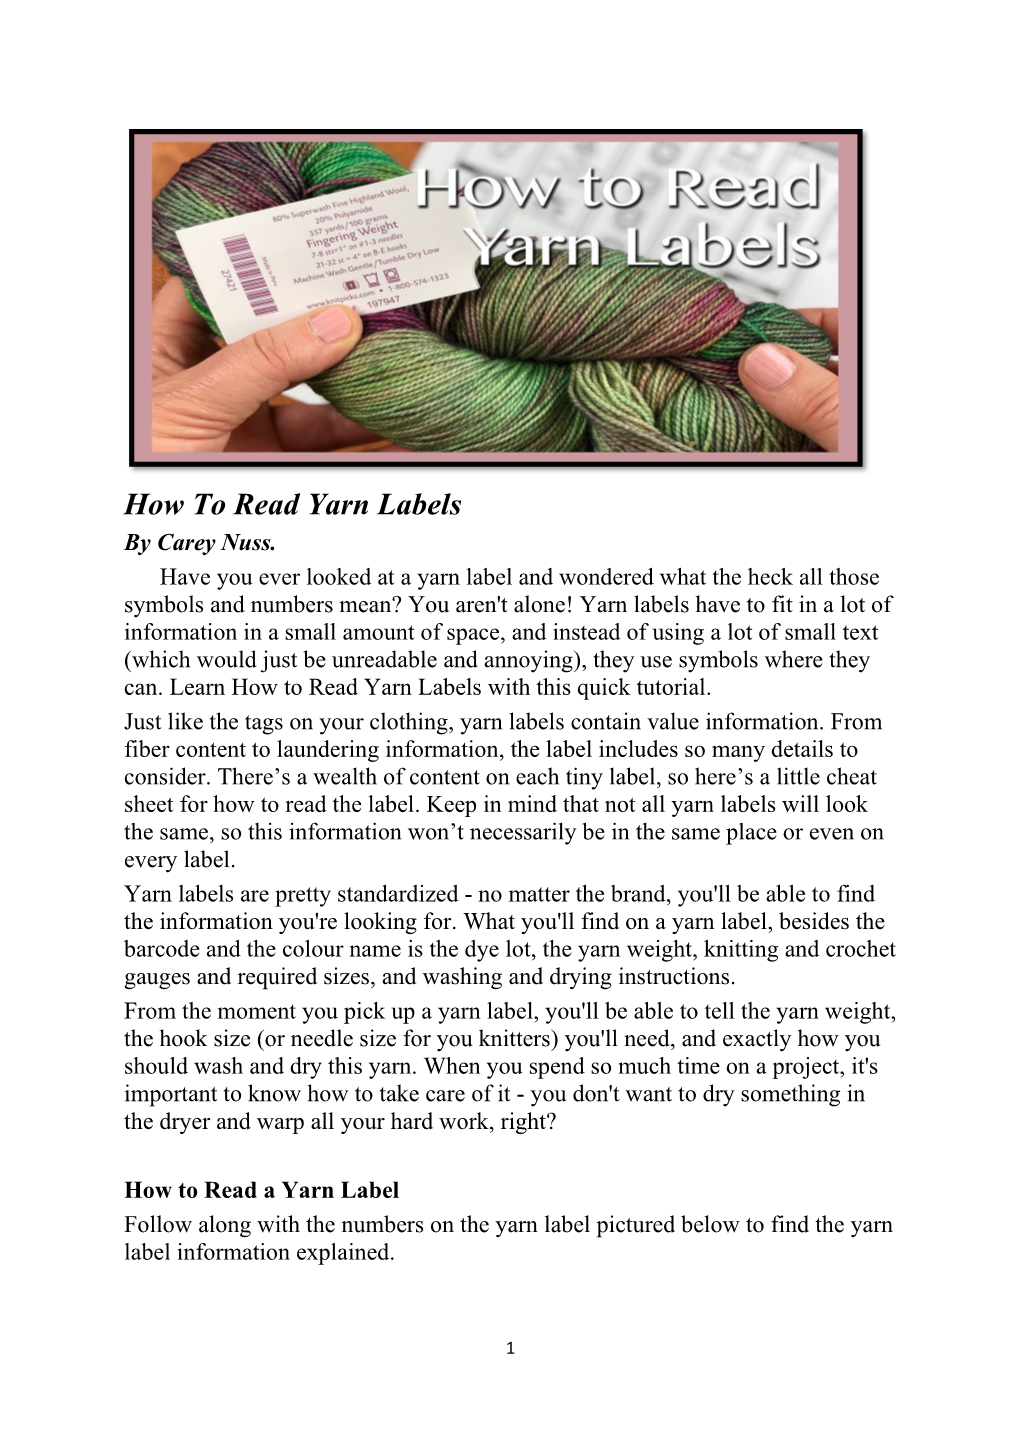 How to Read Yarn Labels by Carey Nuss